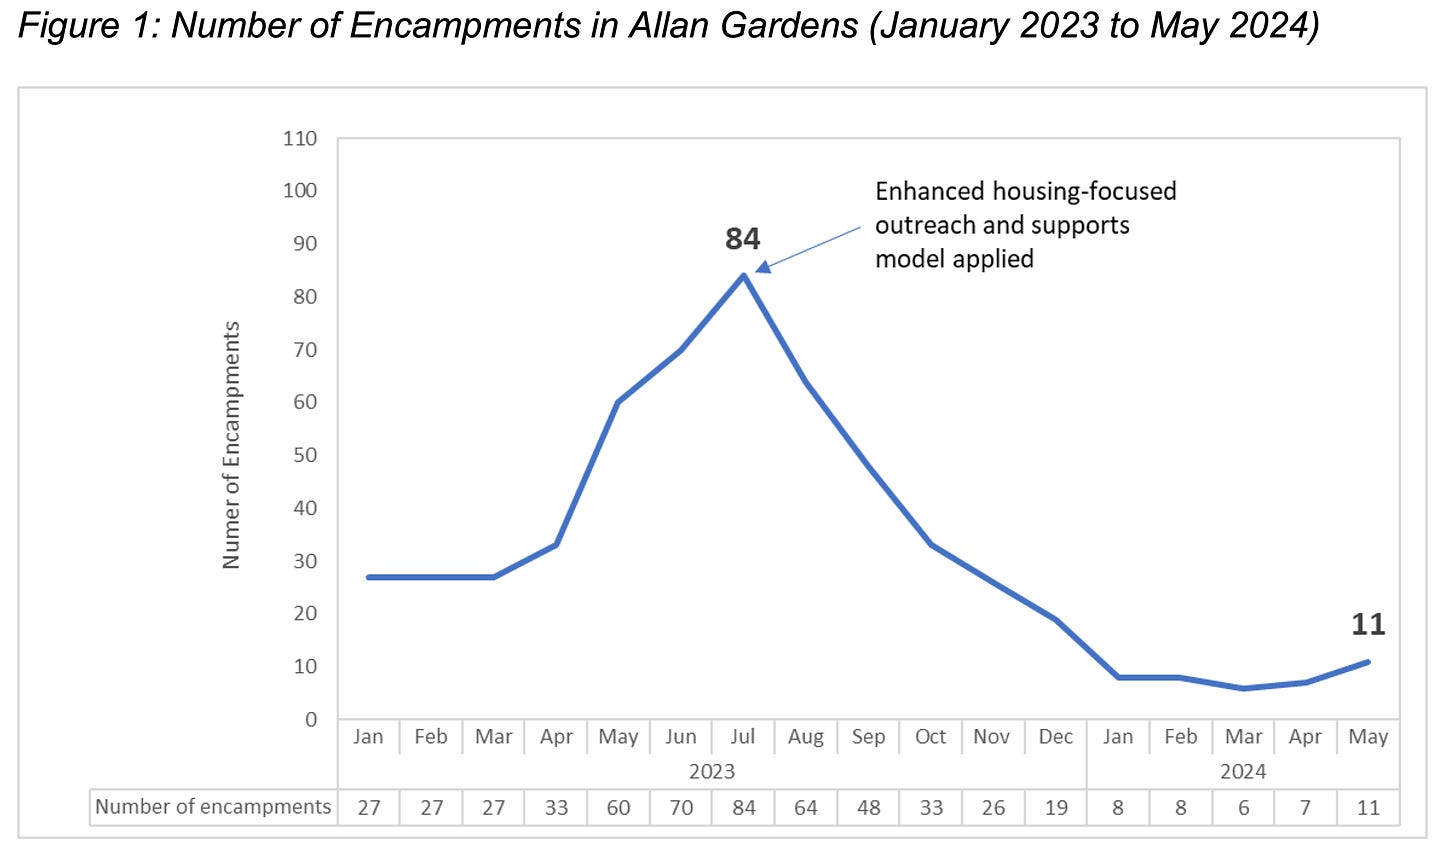 Chart from report - line graph showing number of encampments in Allan Gardens, showing steep decline